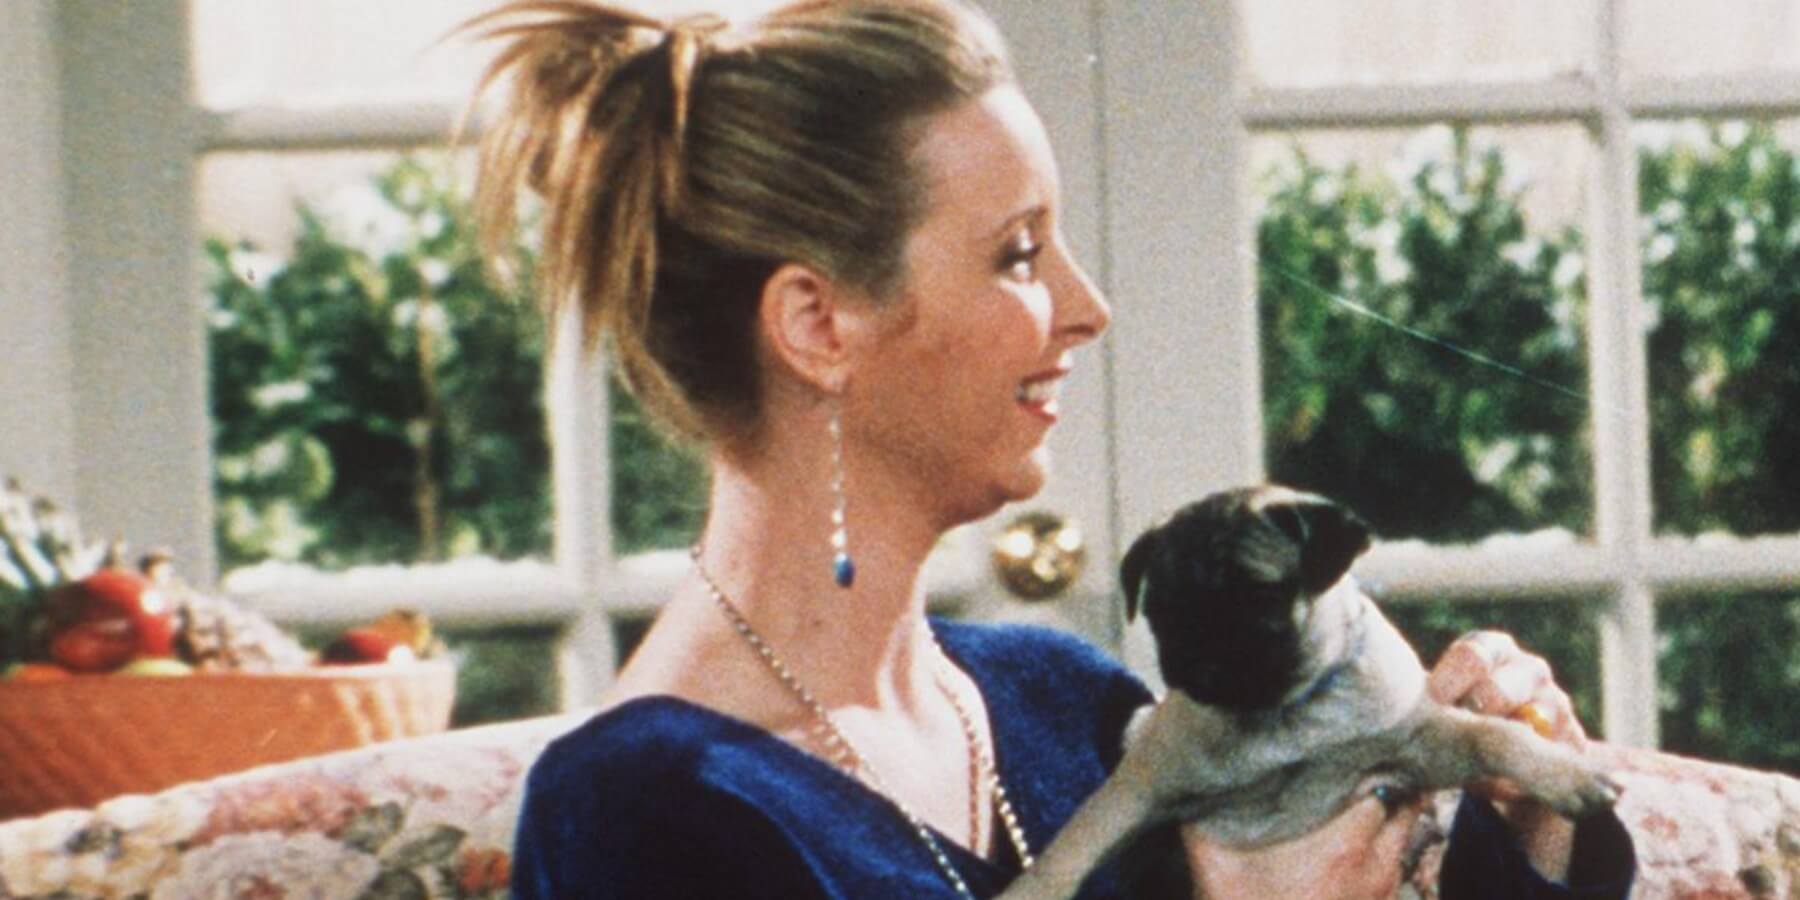 Lisa Kudrow pictured in a scene still from season 4 of 'Friends.'